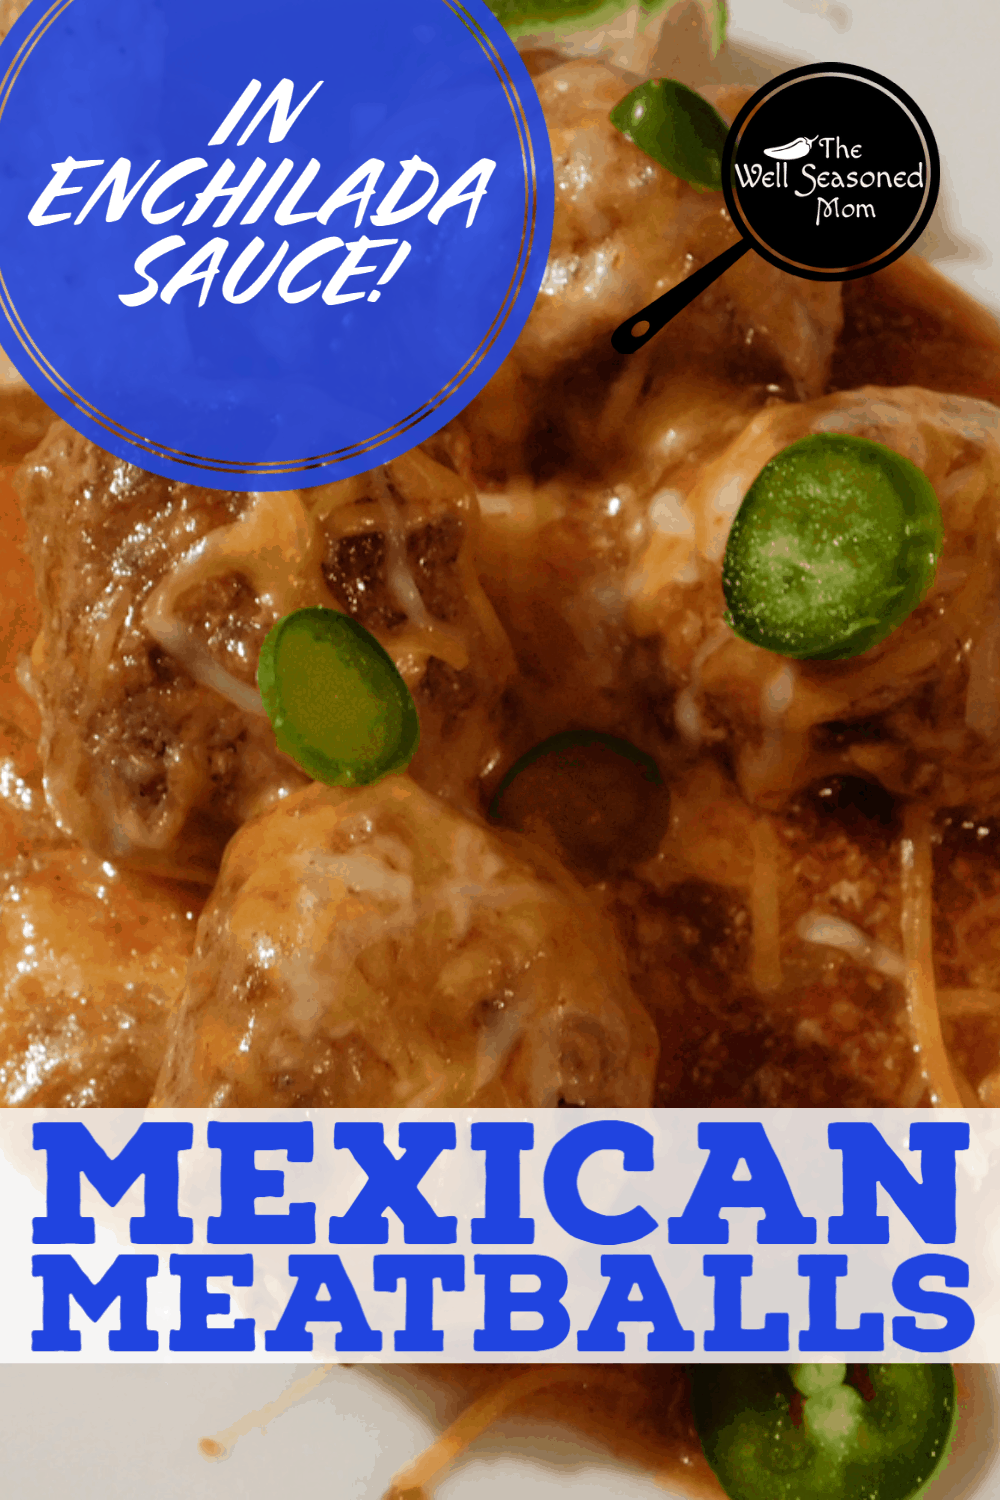 Cheesy Mexican Meatballs in Enchilada Sauce - The Well Seasoned Mom